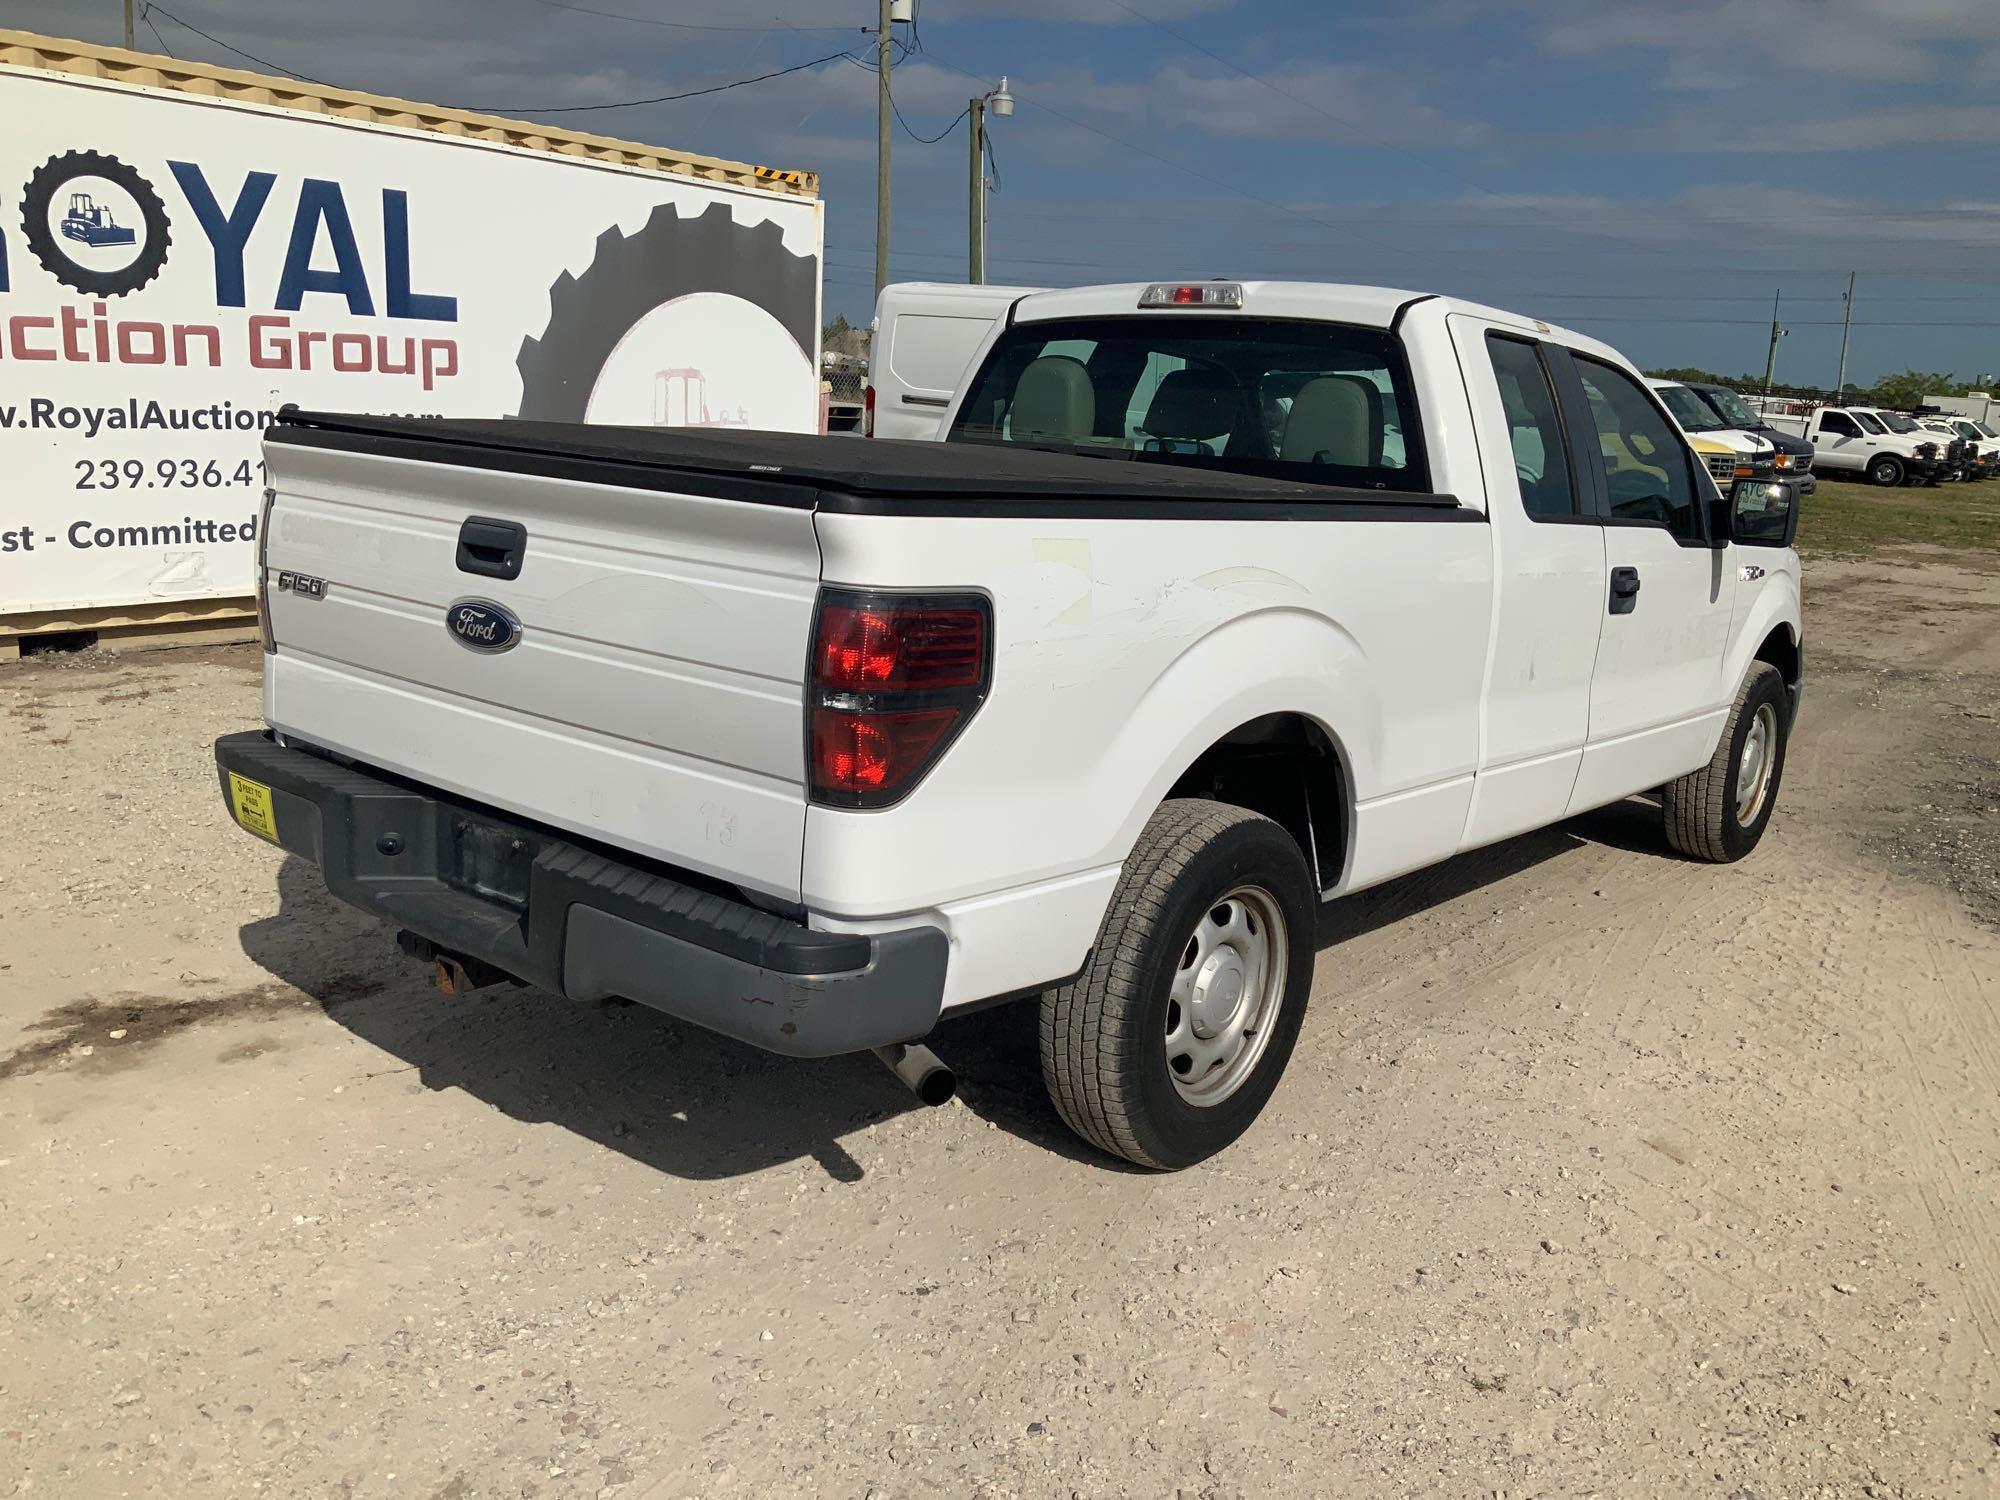 2010 Ford F-150 Extended Cab Pickup Truck,